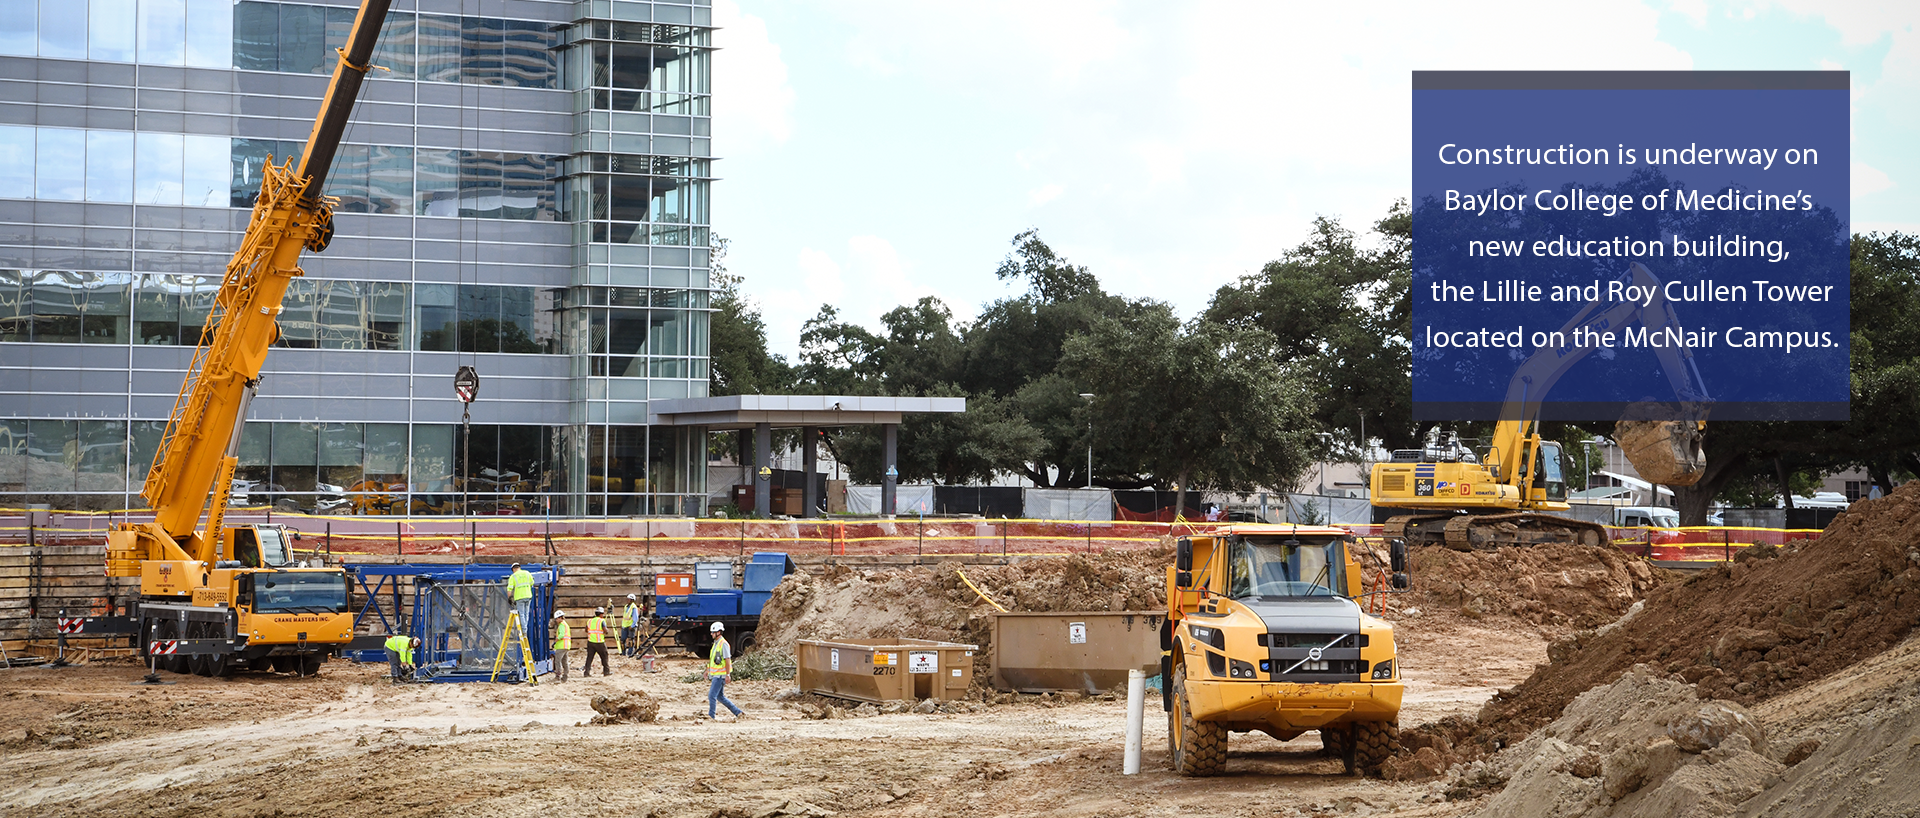 Construction is underway on Baylor College of Medicine's new education building, the Lillie and Roy Cullen Tower located on the McNair Campus.  